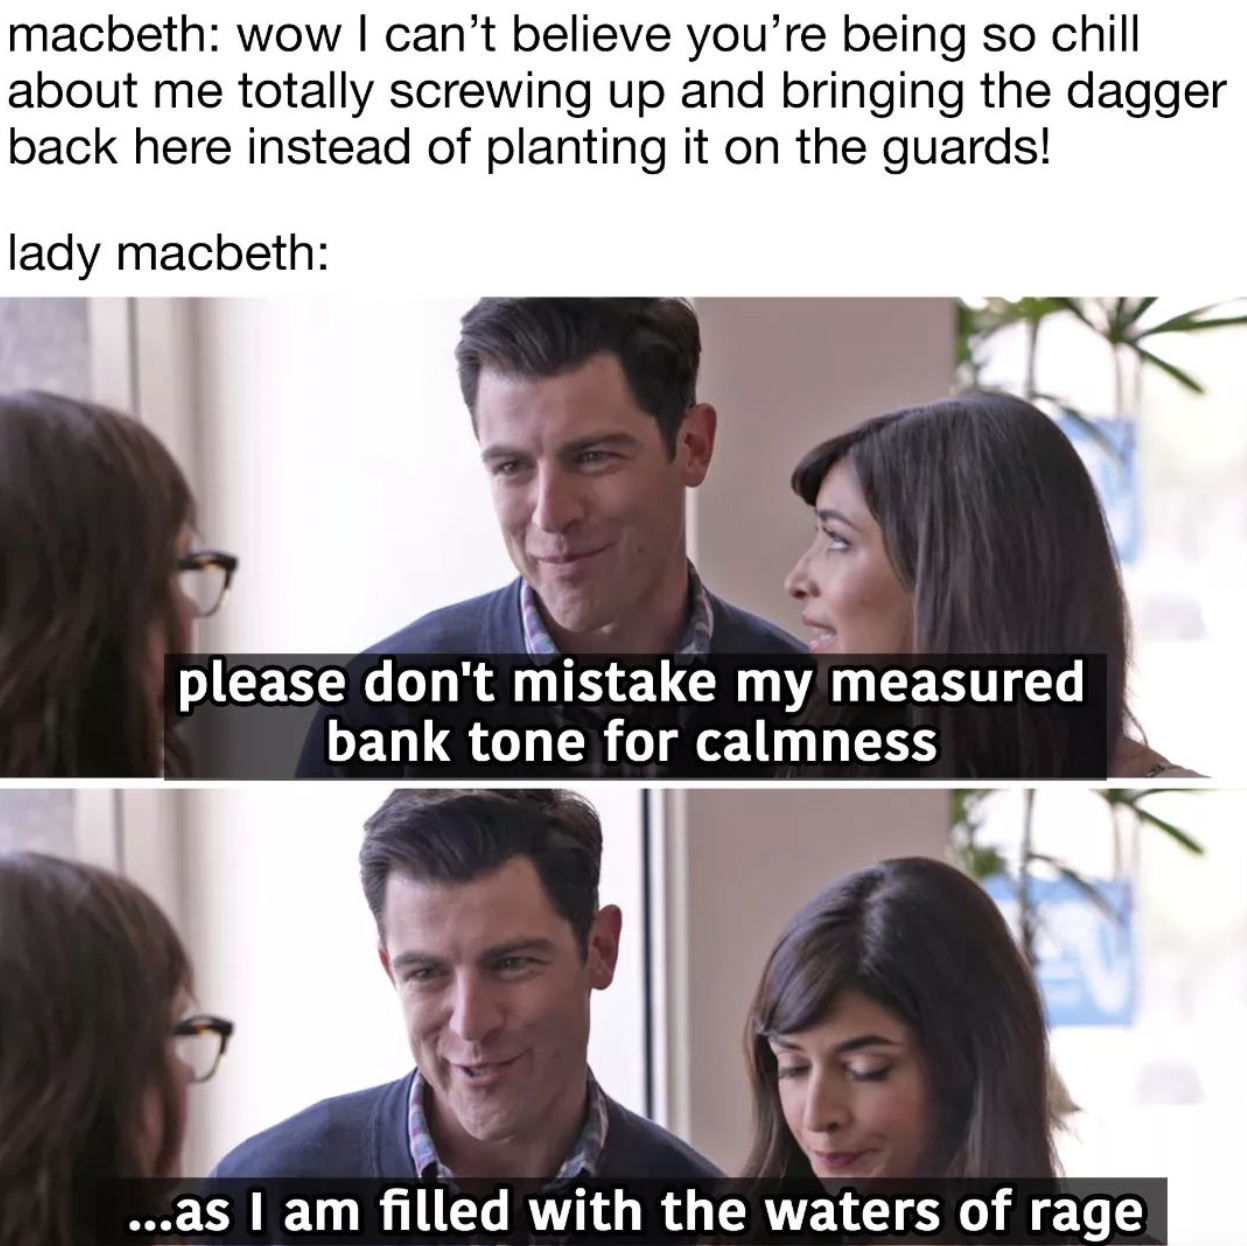 SparkNotes memes - facial expression - macbeth wow I can't believe you're being so chill about me totally screwing up and bringing the dagger back here instead of planting it on the guards! lady macbeth please don't mistake my measured bank tone for calmn